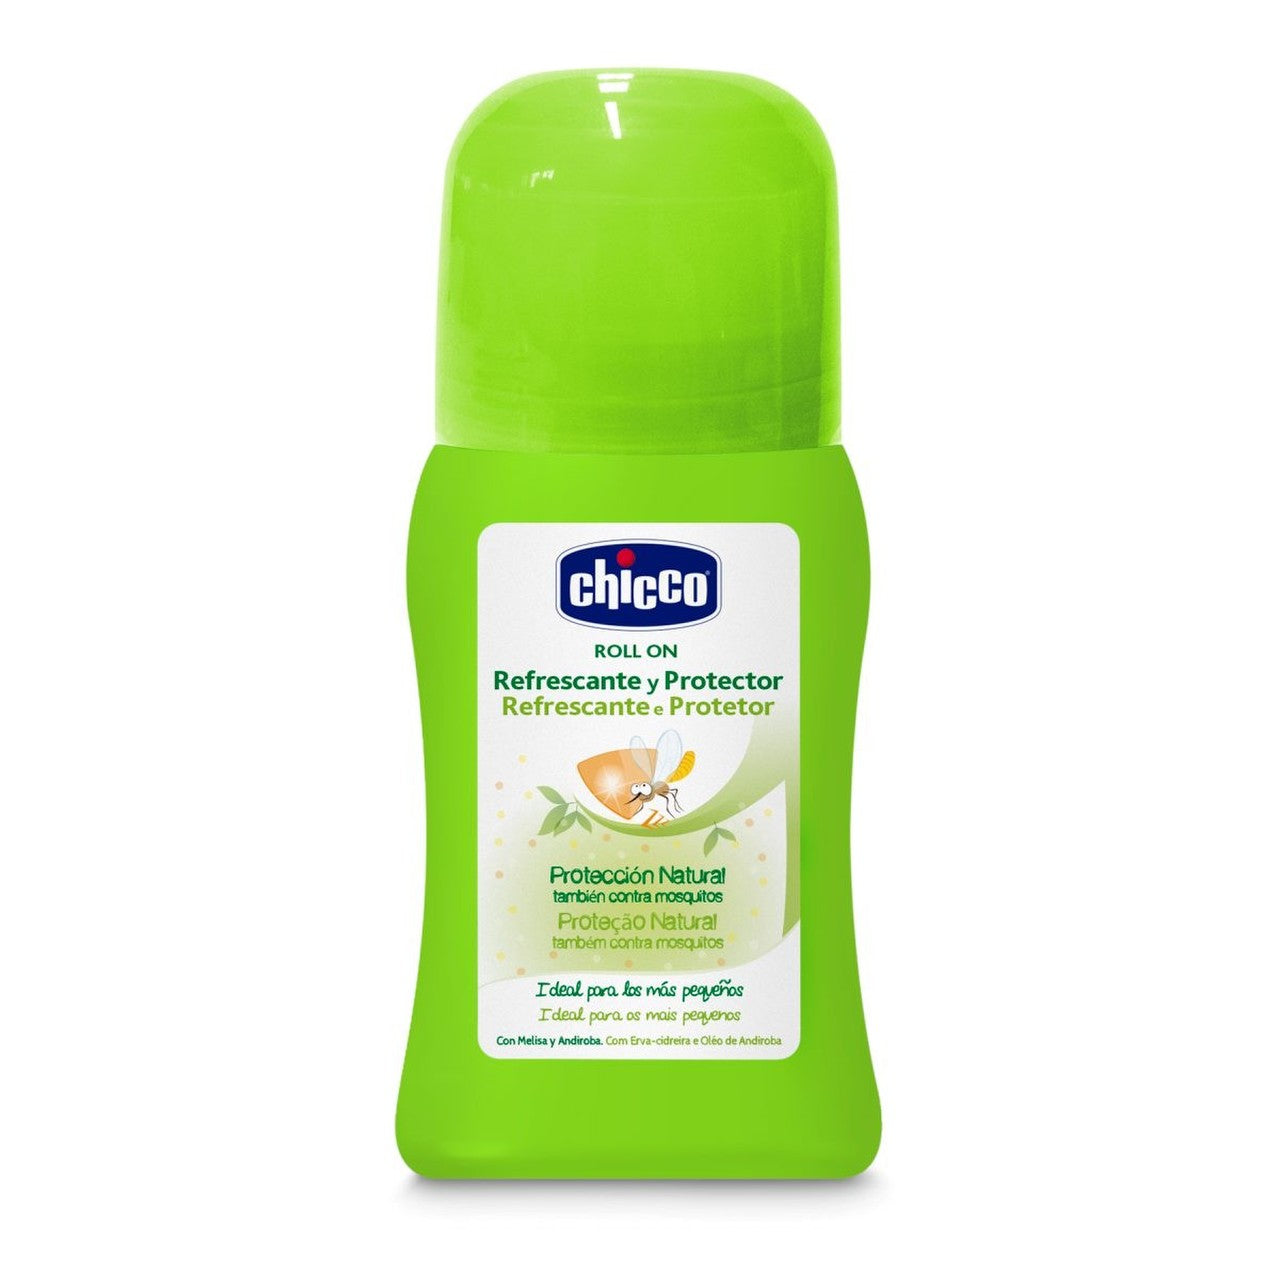 Chicco repelente insectos roll on